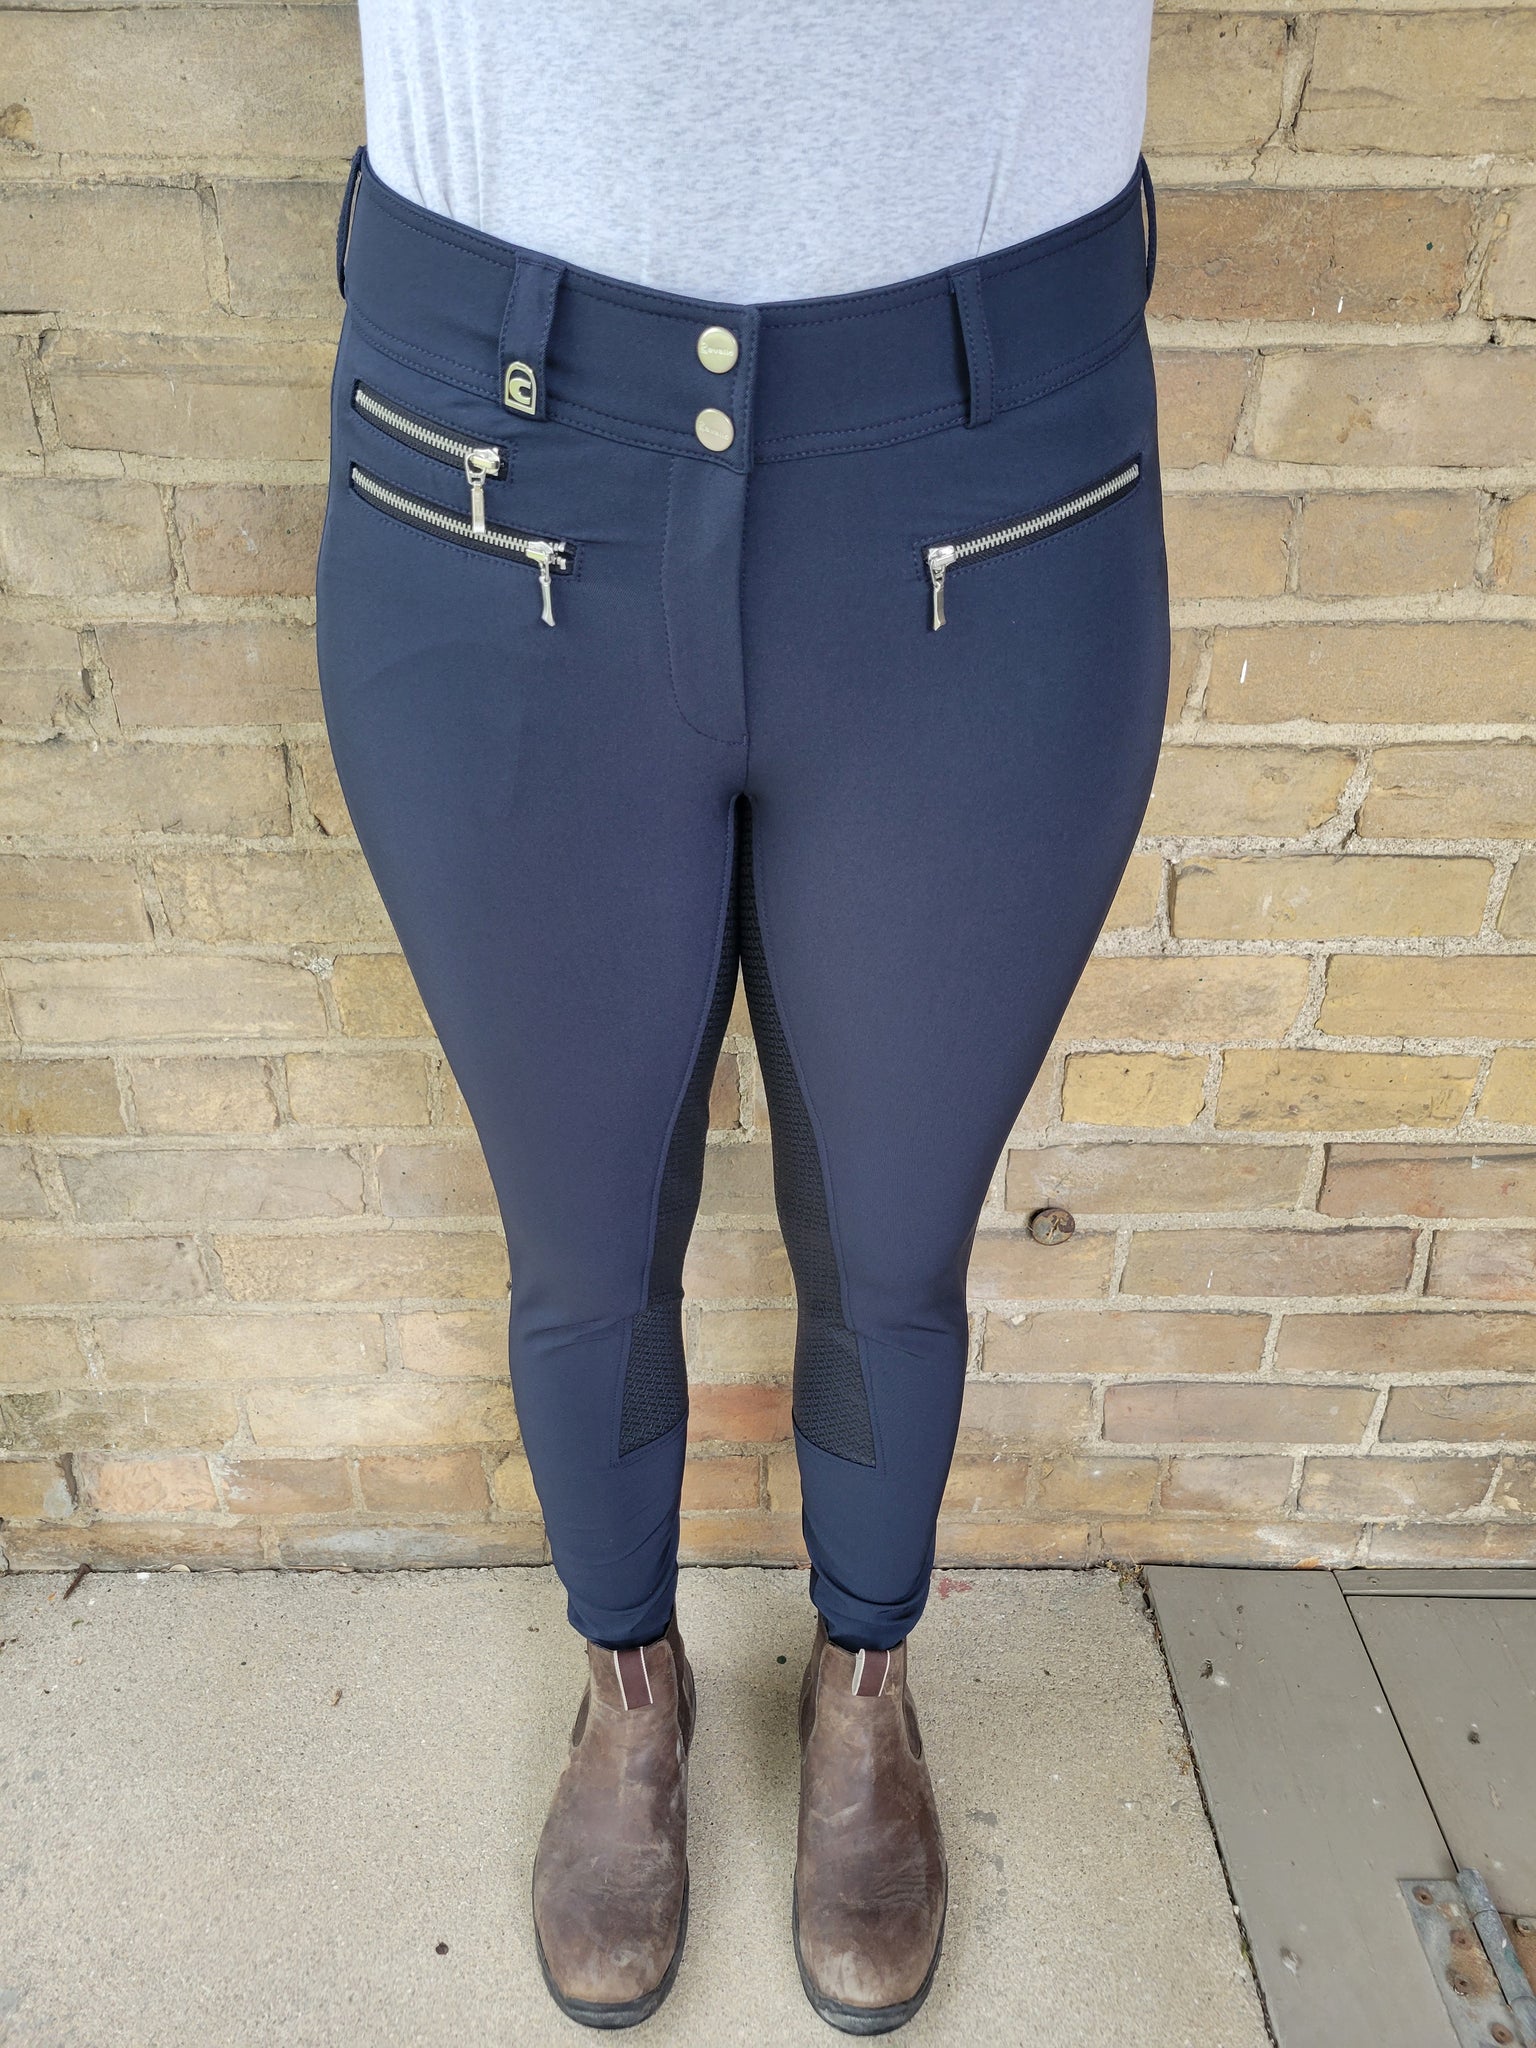 Cavallo Candy Pro Grip FS Breeches - Equestrian Fashion Outfitters